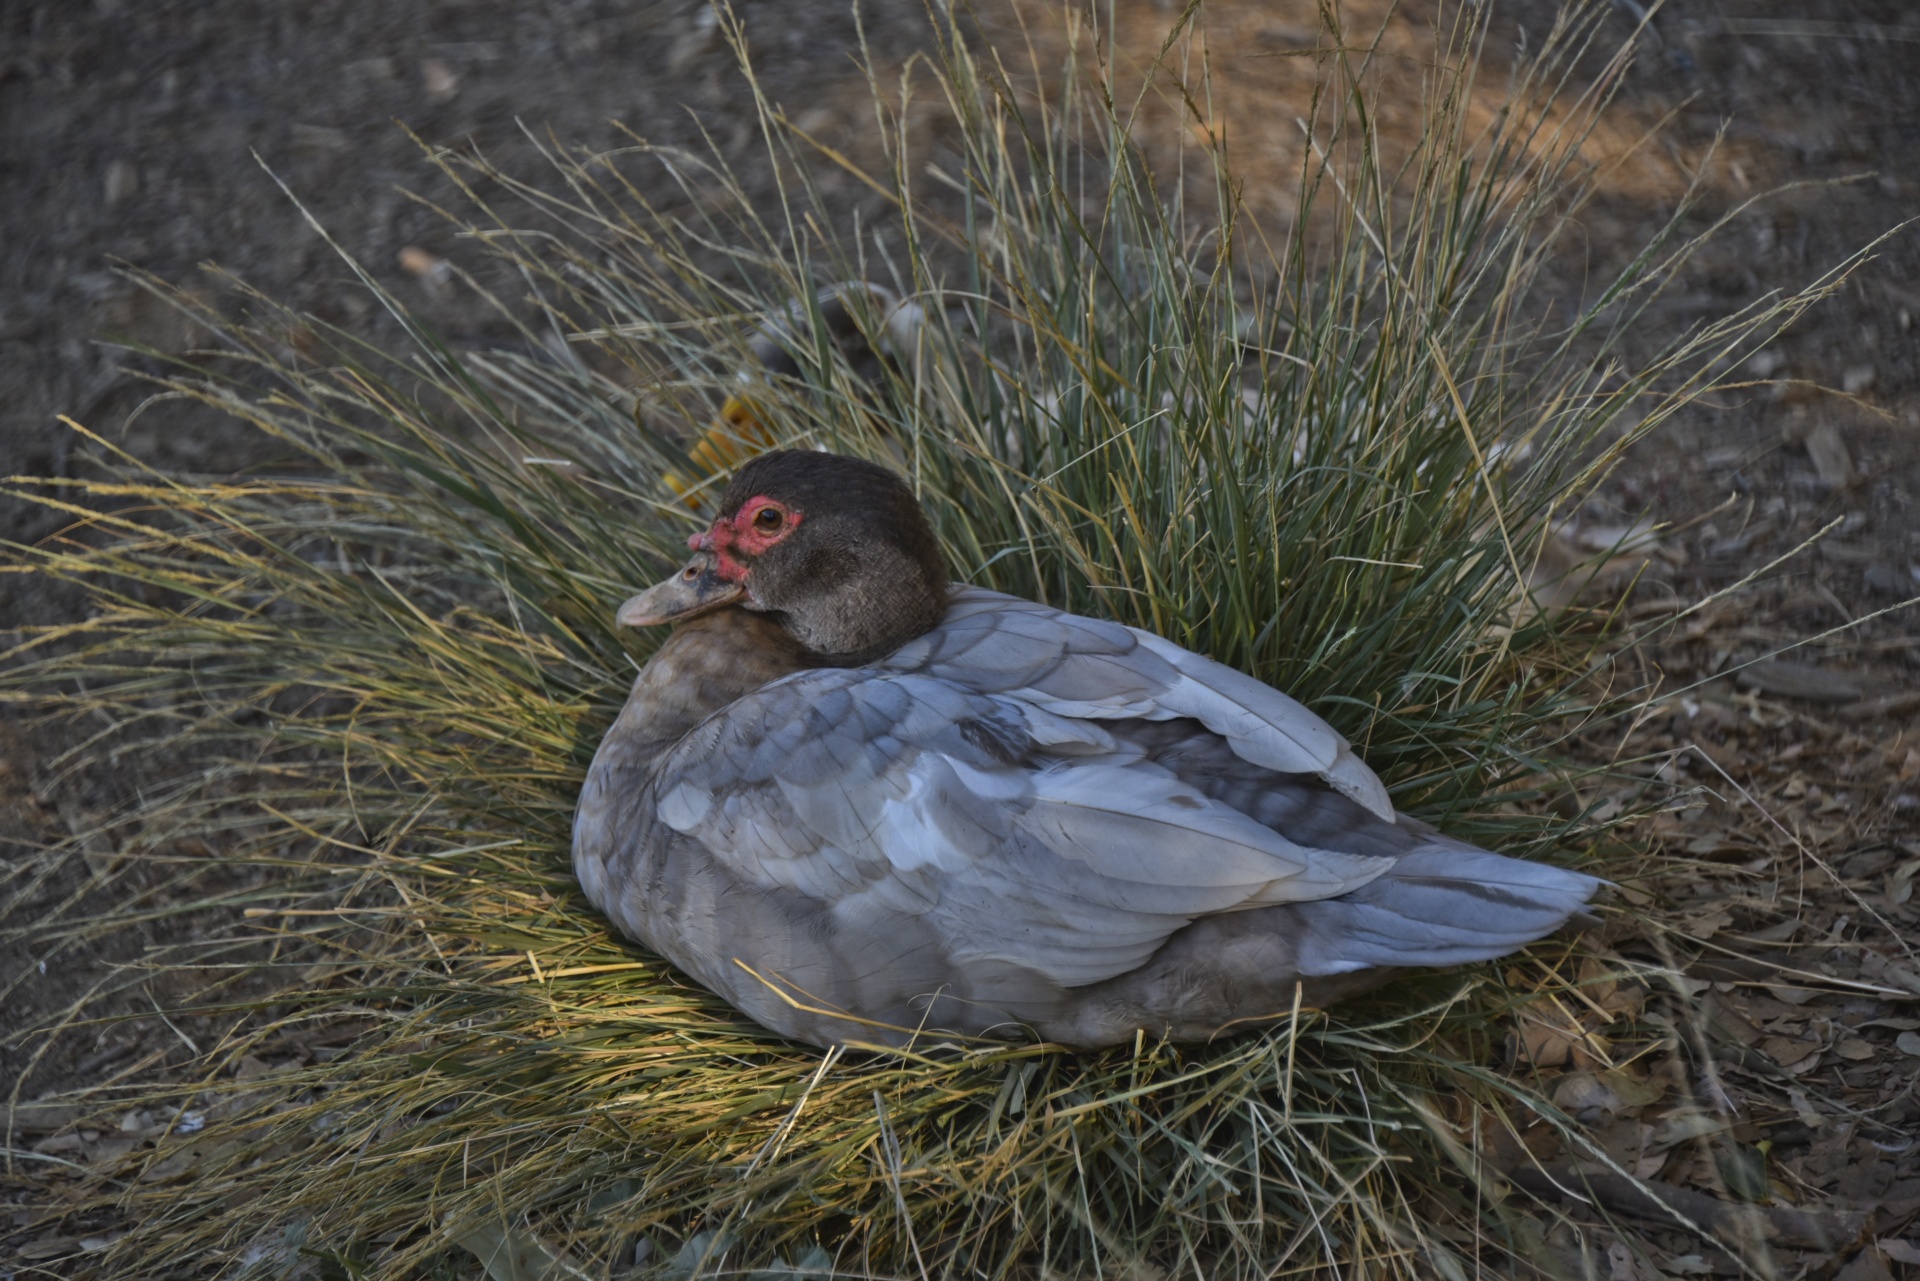 Female Muscovy duck in brown colors sitting on a grass nest